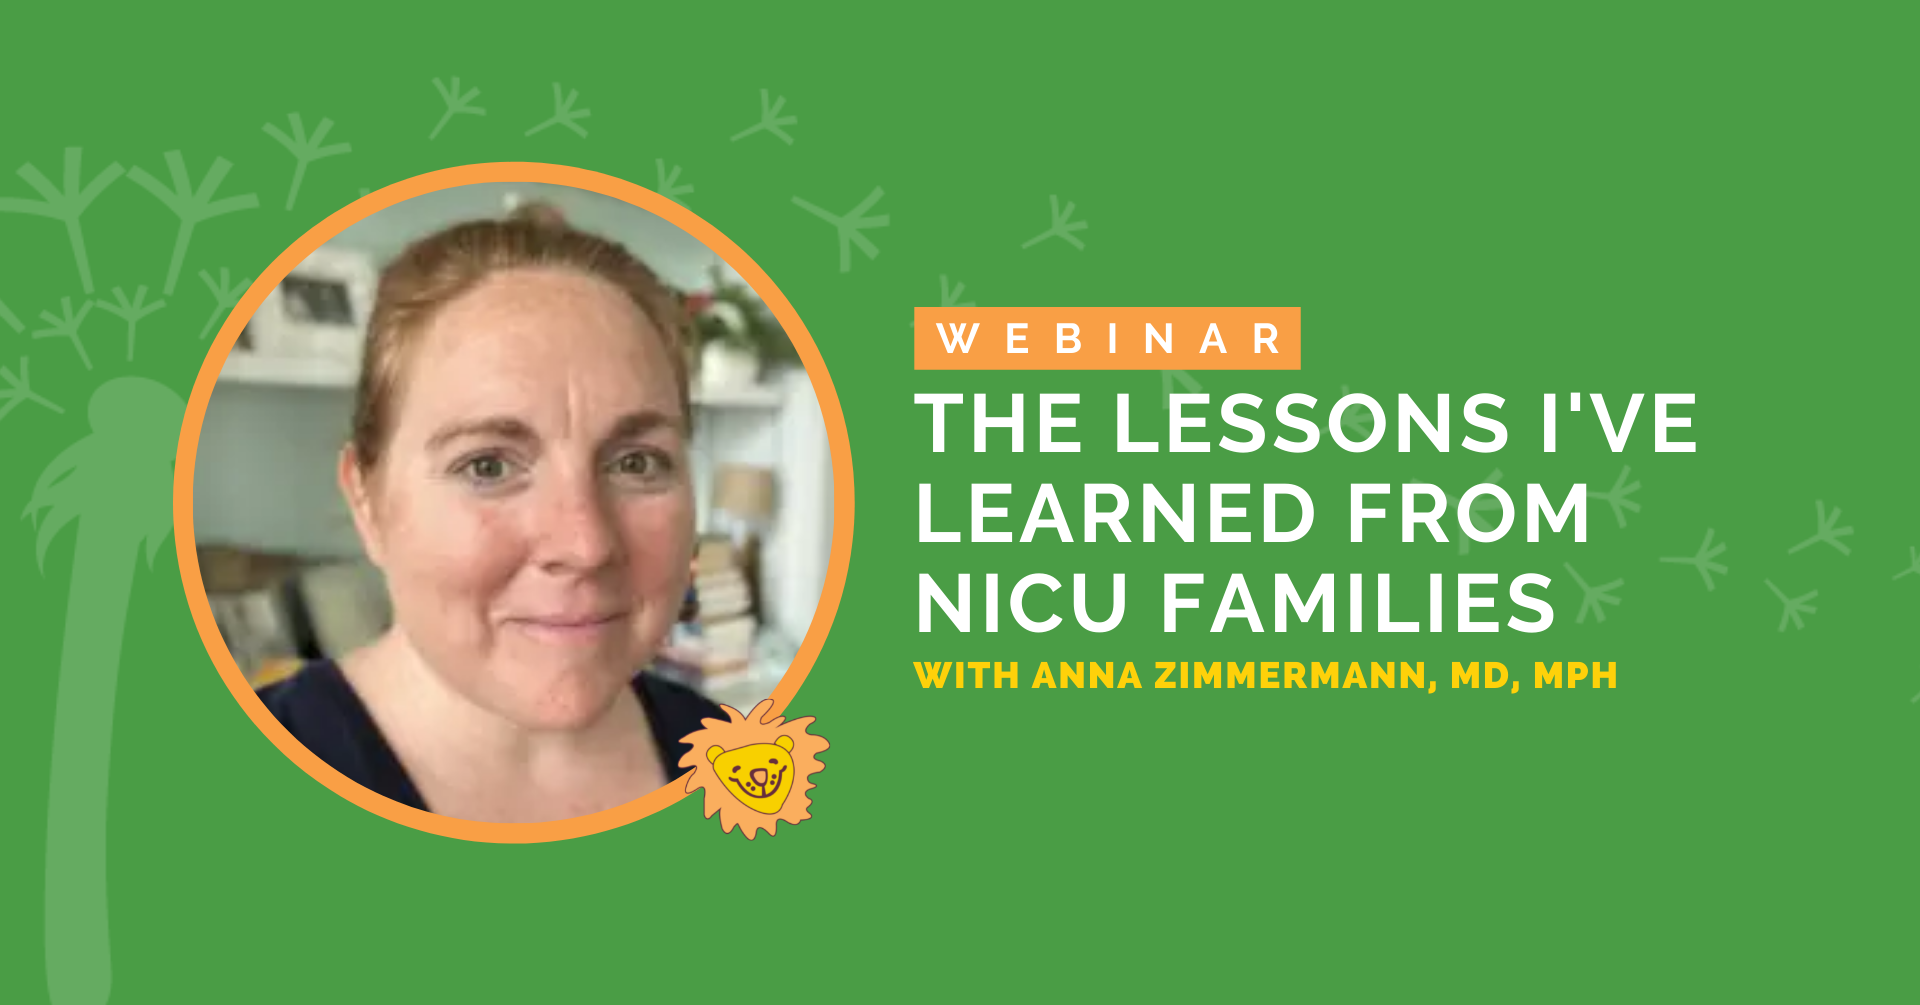 The Lessons I've Learned from NICU Families - Dandle•LION Medical